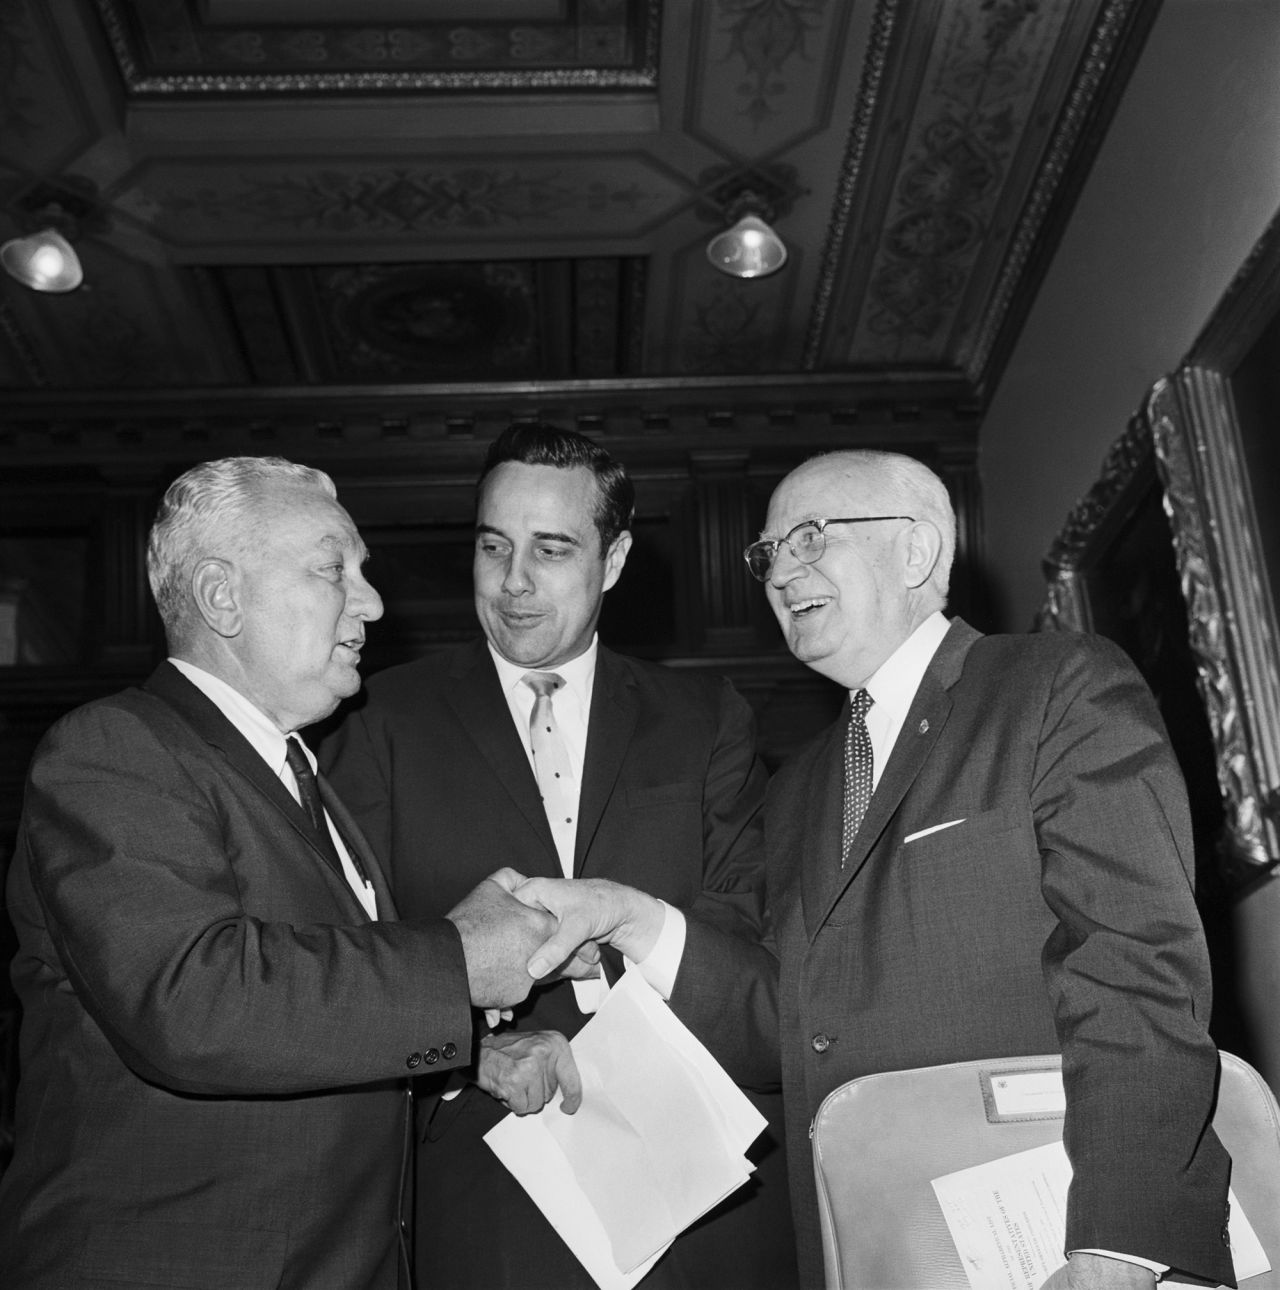 Dole is seen between fellow US Reps. Charles A. Halleck and Charles B. Hoeven in 1962. After the war, Dole went into politics. He served in the Kansas House of Representatives before becoming Russell County prosecutor in 1953. In 1960, Dole was elected to the US House of Representatives.